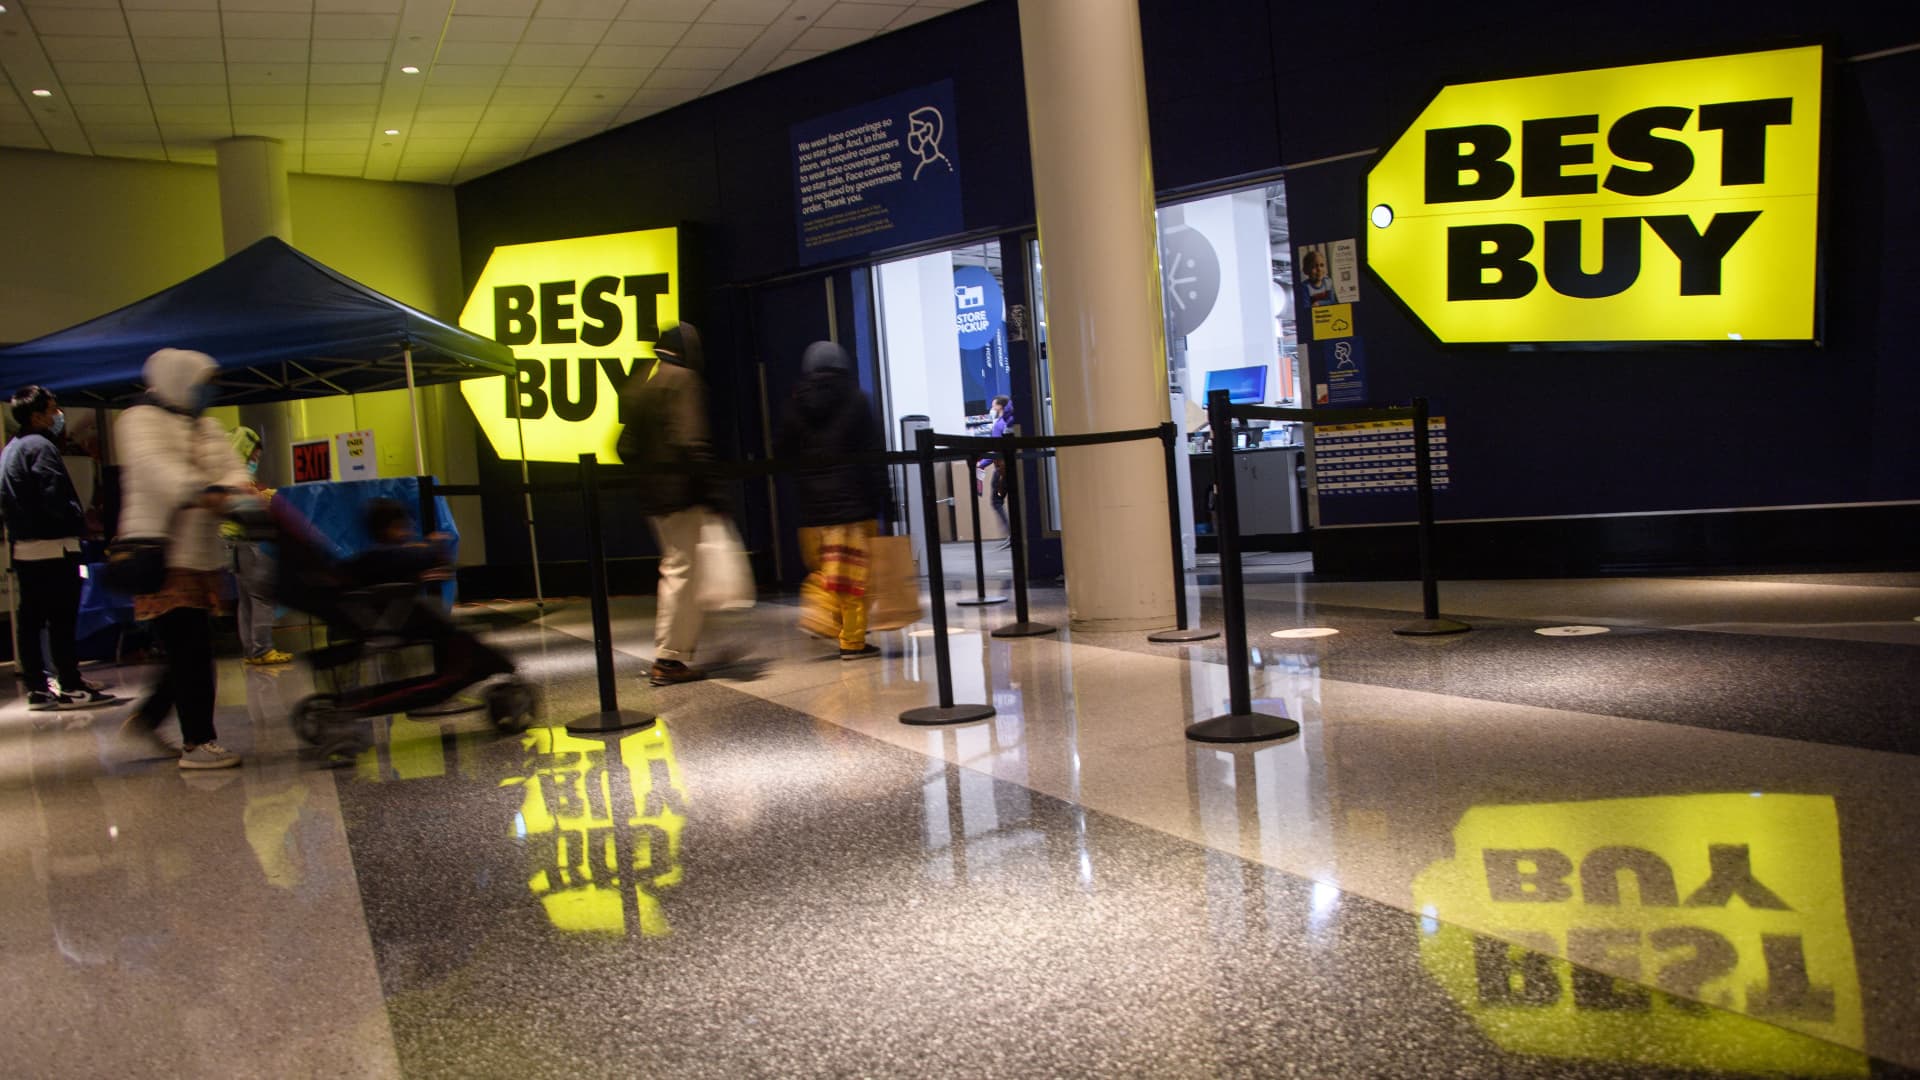 Black Friday shoppers leave a Best Buy store in Washington, DC, on November 26, 20221.